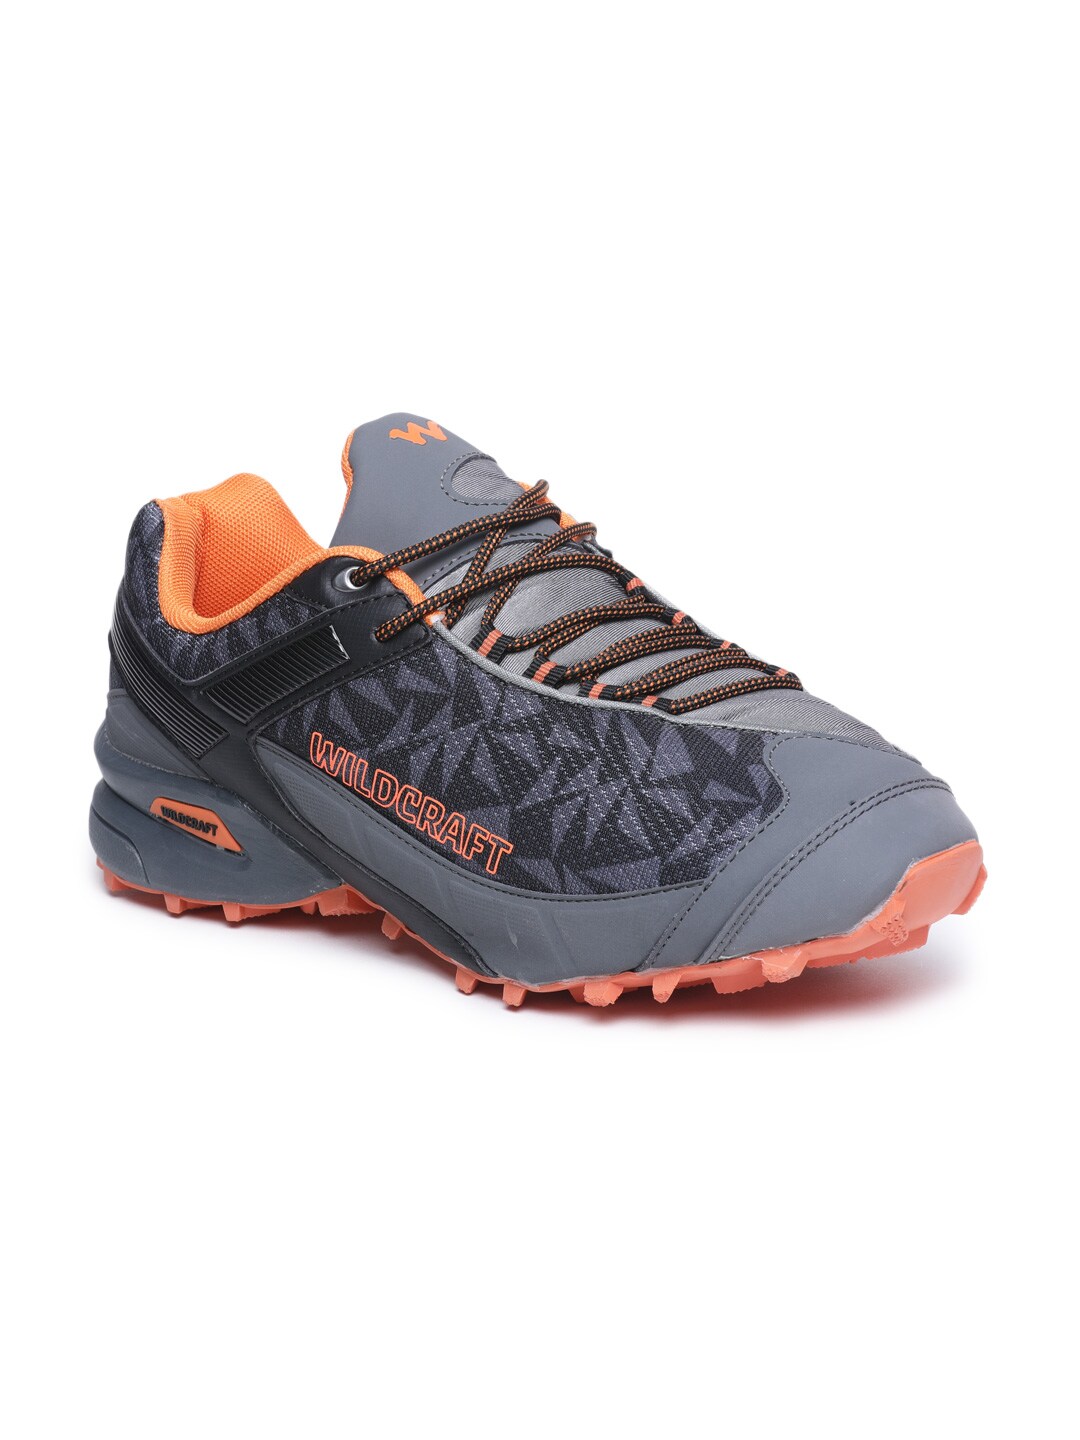 Wildcraft Mamba Grey Outdoor Shoes for Men online in India at Best ...